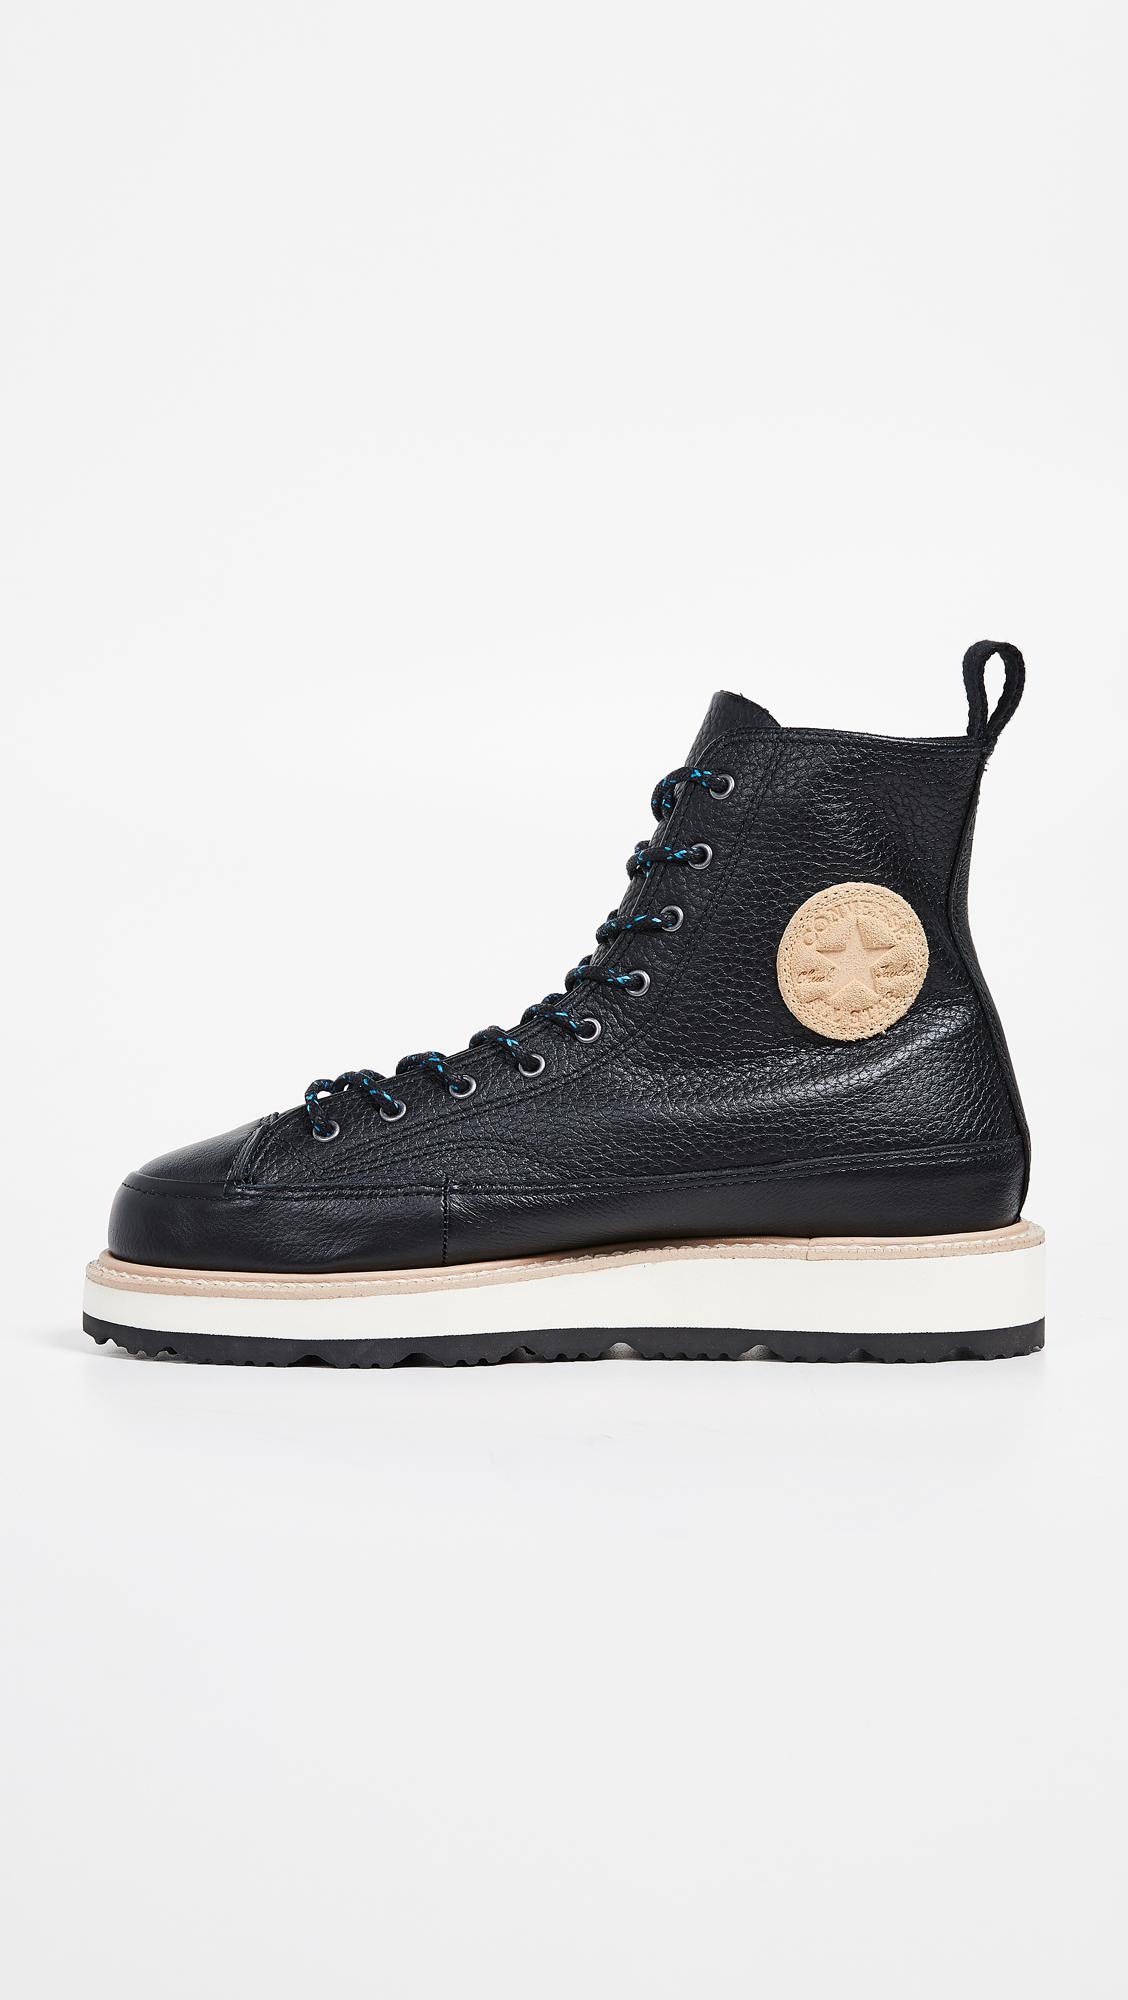 chuck taylor all star crafted high top boot